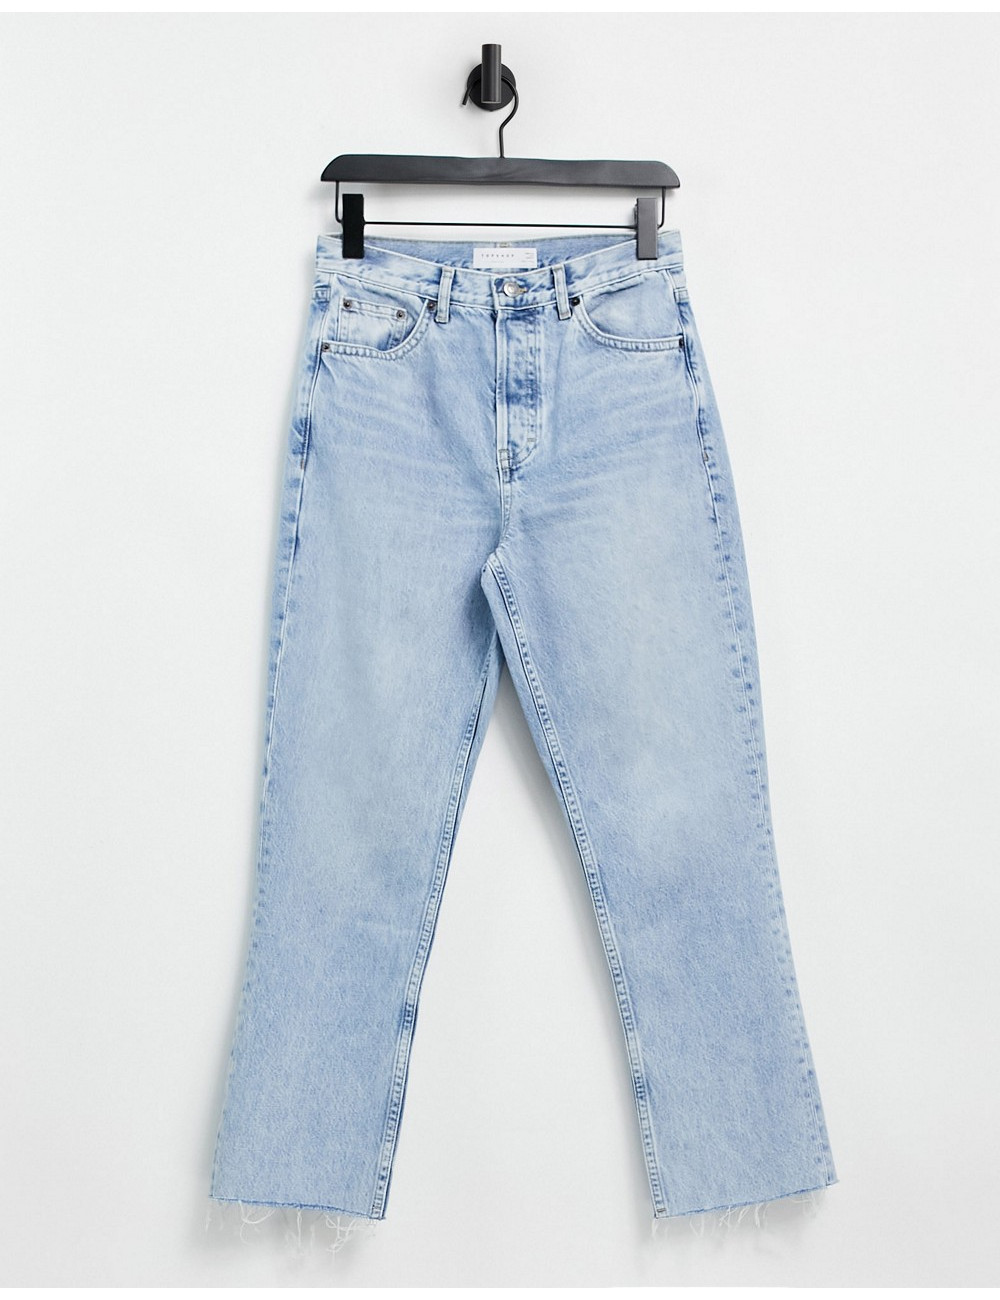 Topshop editor jeans in bleach